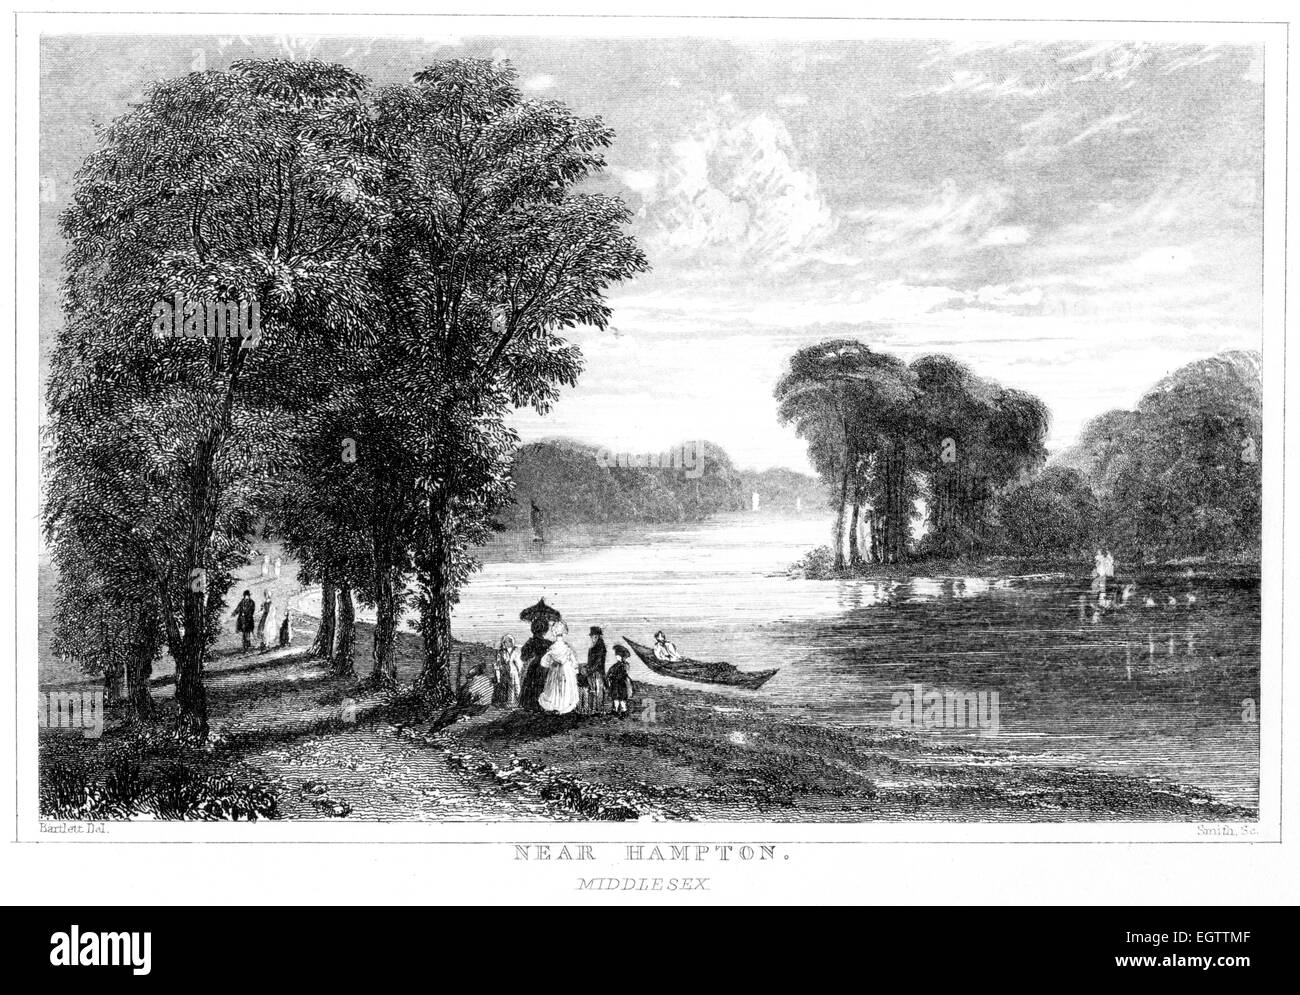 An engraving near Hampton, Middlesex scanned at high resolution from a book printed around 1850. Stock Photo